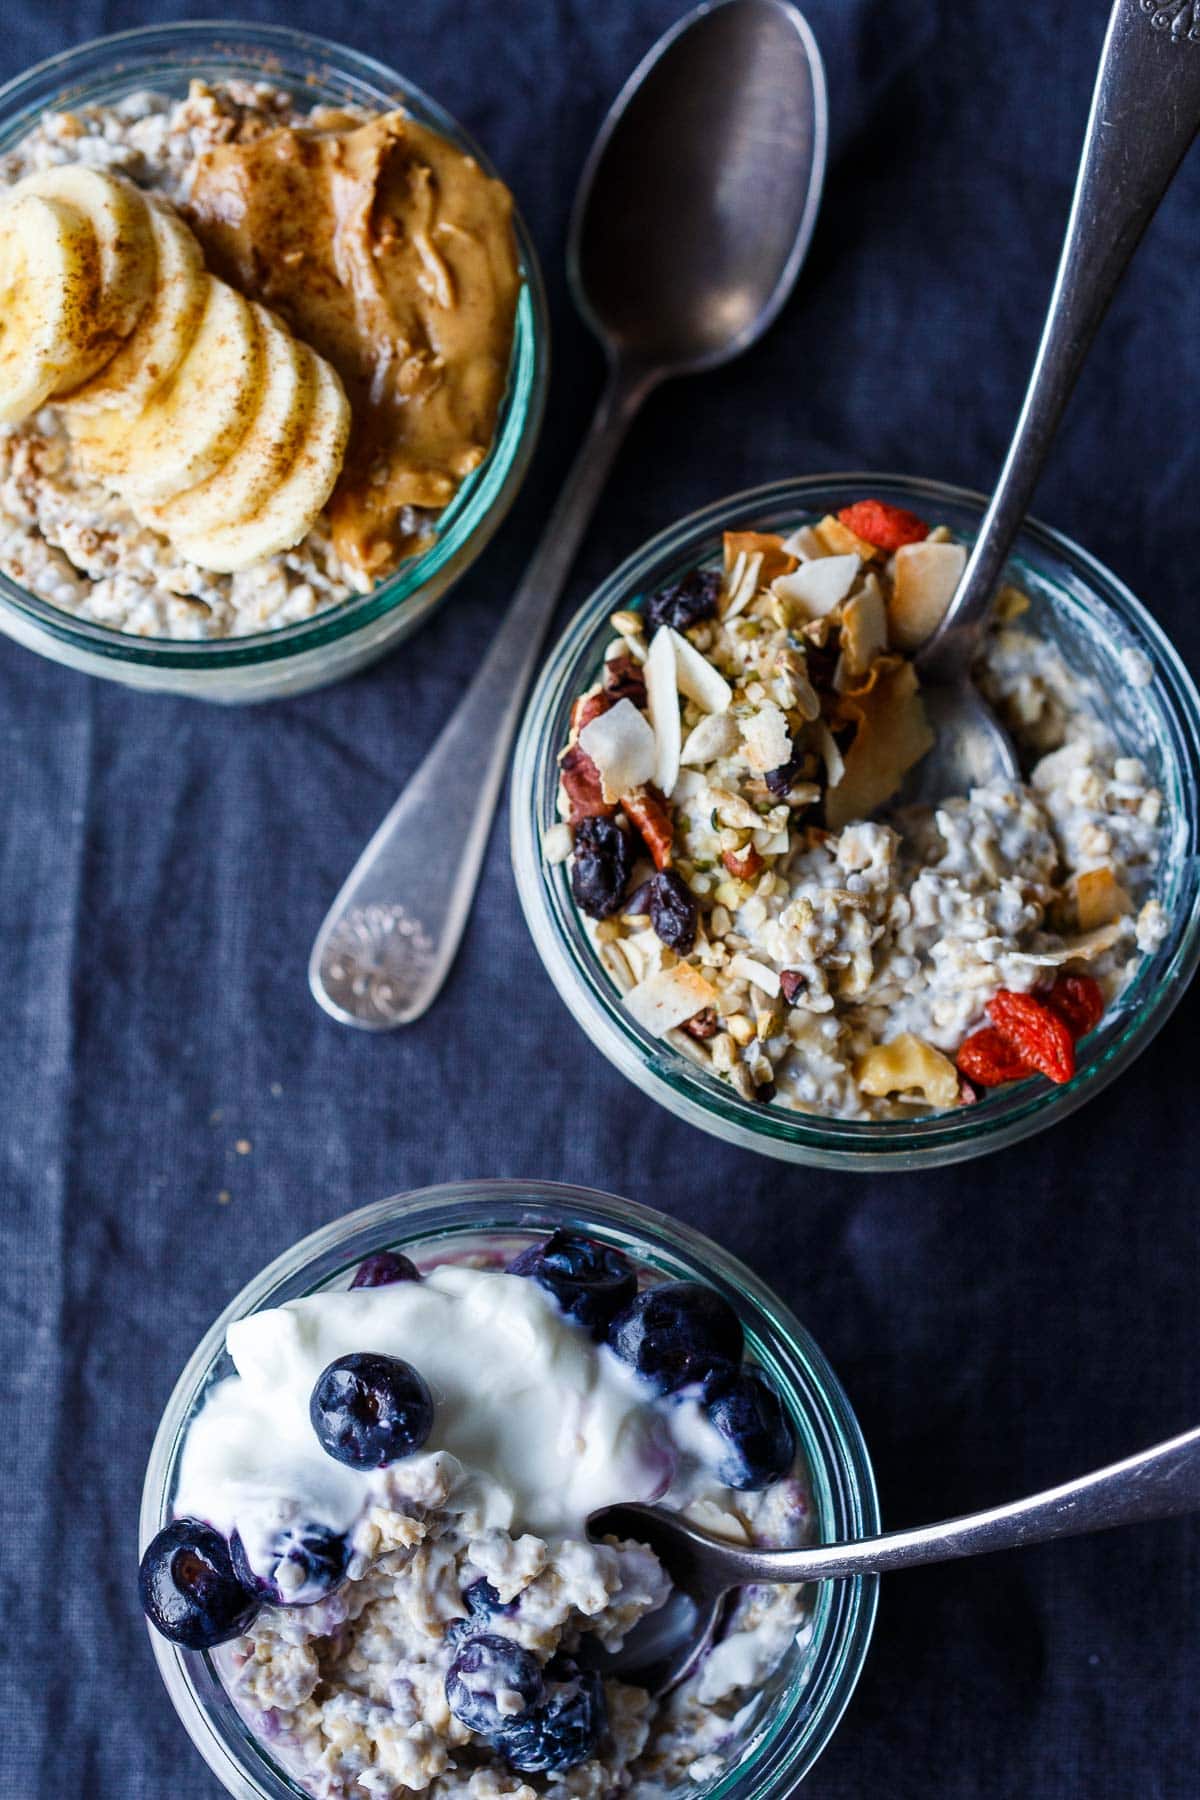 How to make Overnight Oats, an easy no-cook technique for a healthy grab-and-go breakfast or snack that is full of fiber and completely adaptable.  Top with fruit, nuts, seeds, peanut butter and yogurt.Just 10 minutes of hands-on time, before going into the fridge overnight. 